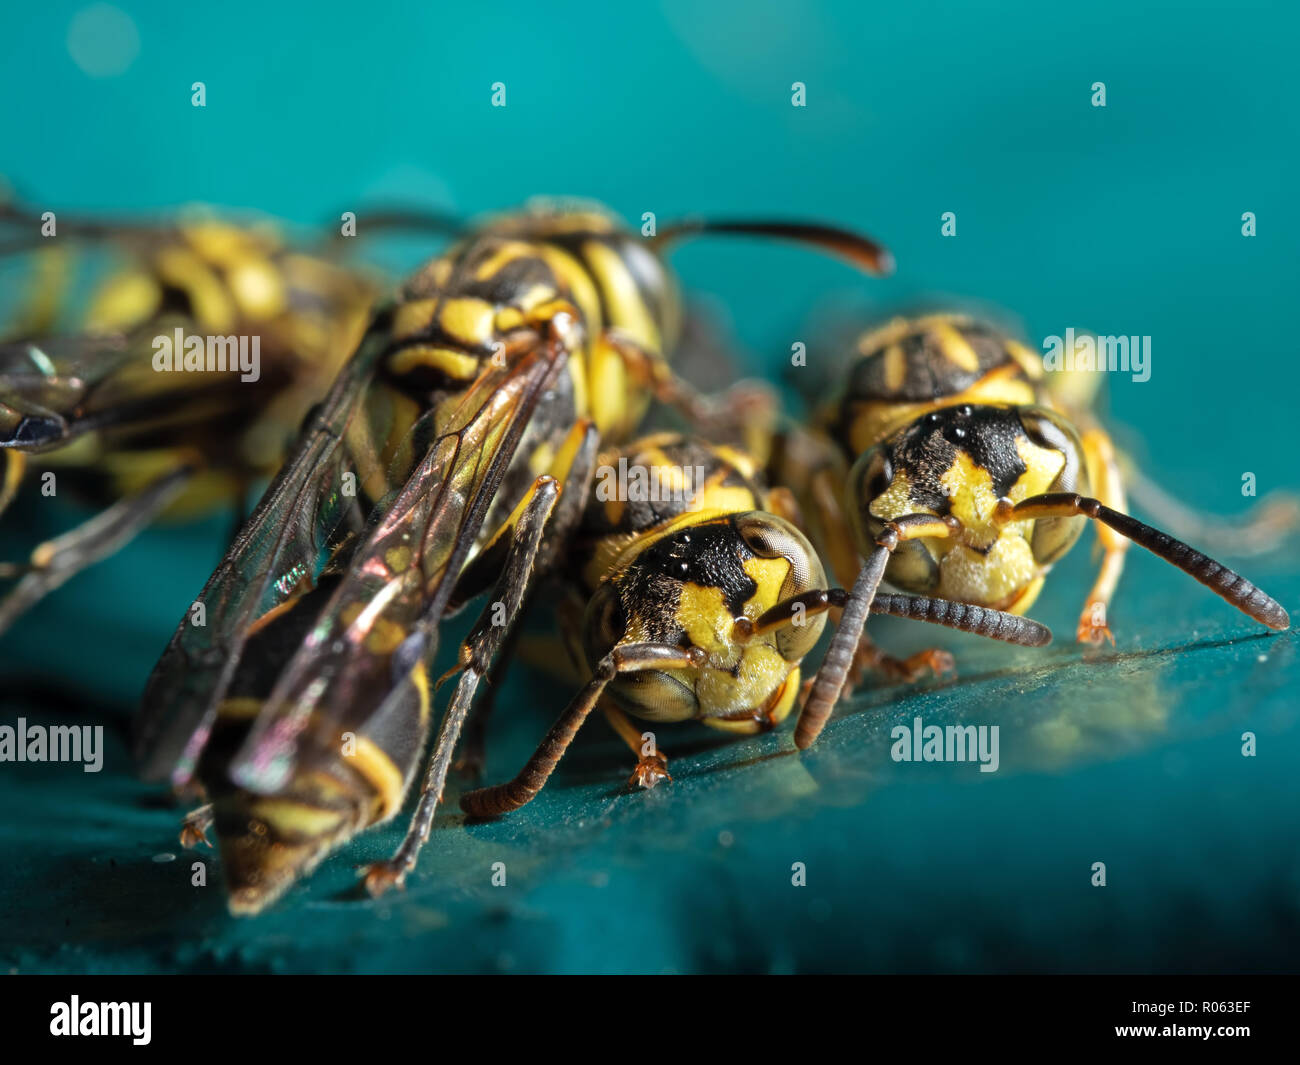 Macro Photography of Group of Wasps on Blue Green Metal Material Stock Photo